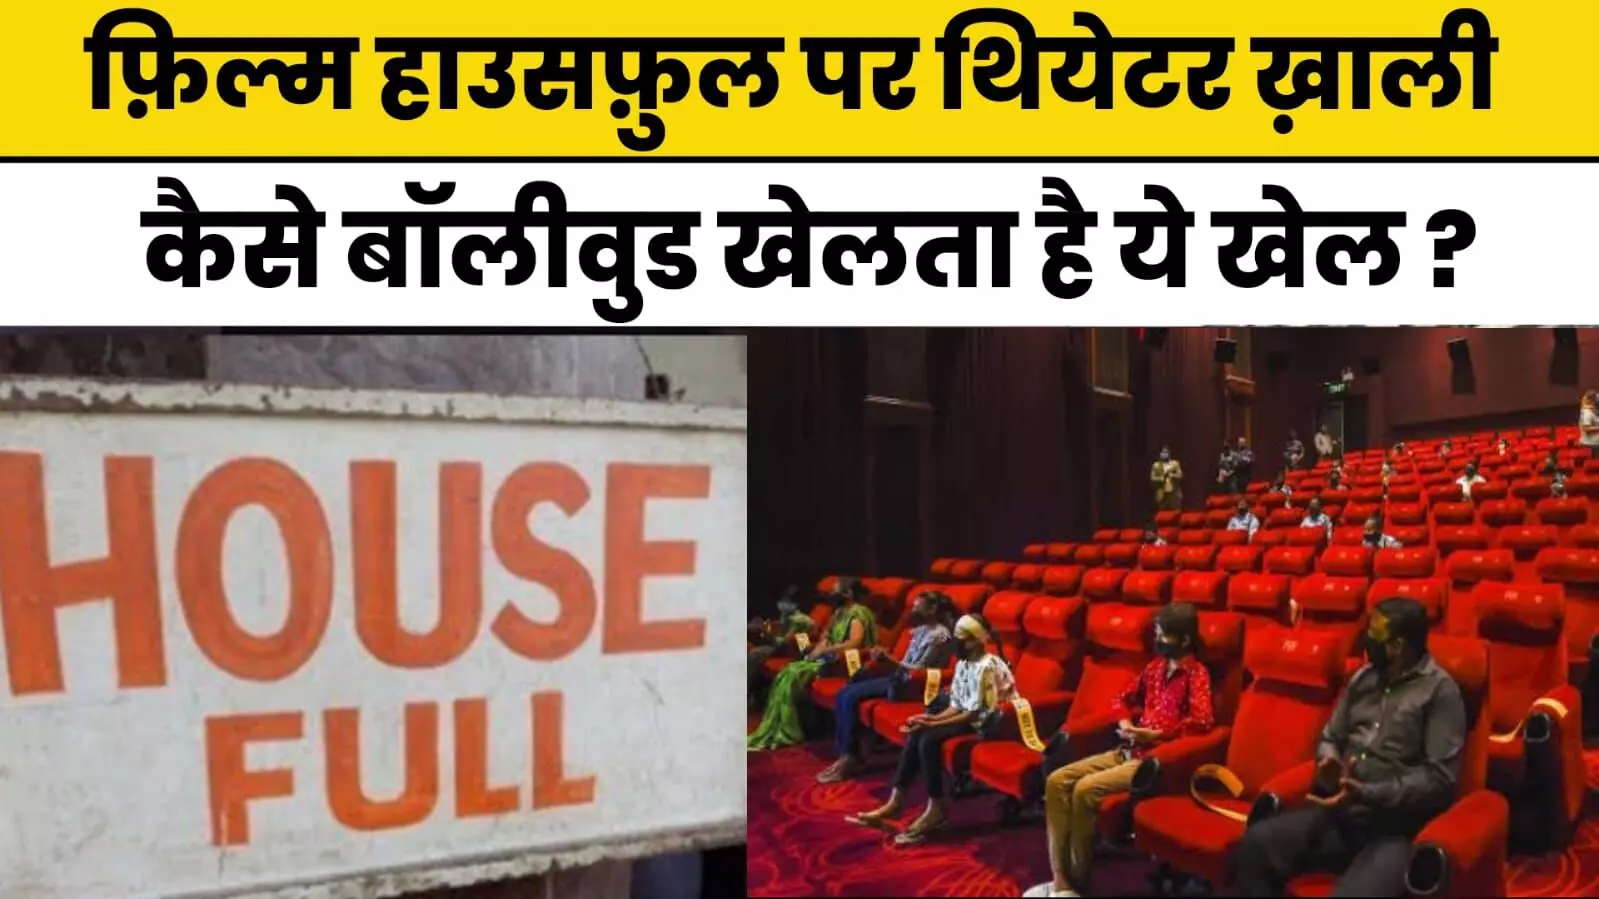 Understand the fund of empty theaters of housefull films